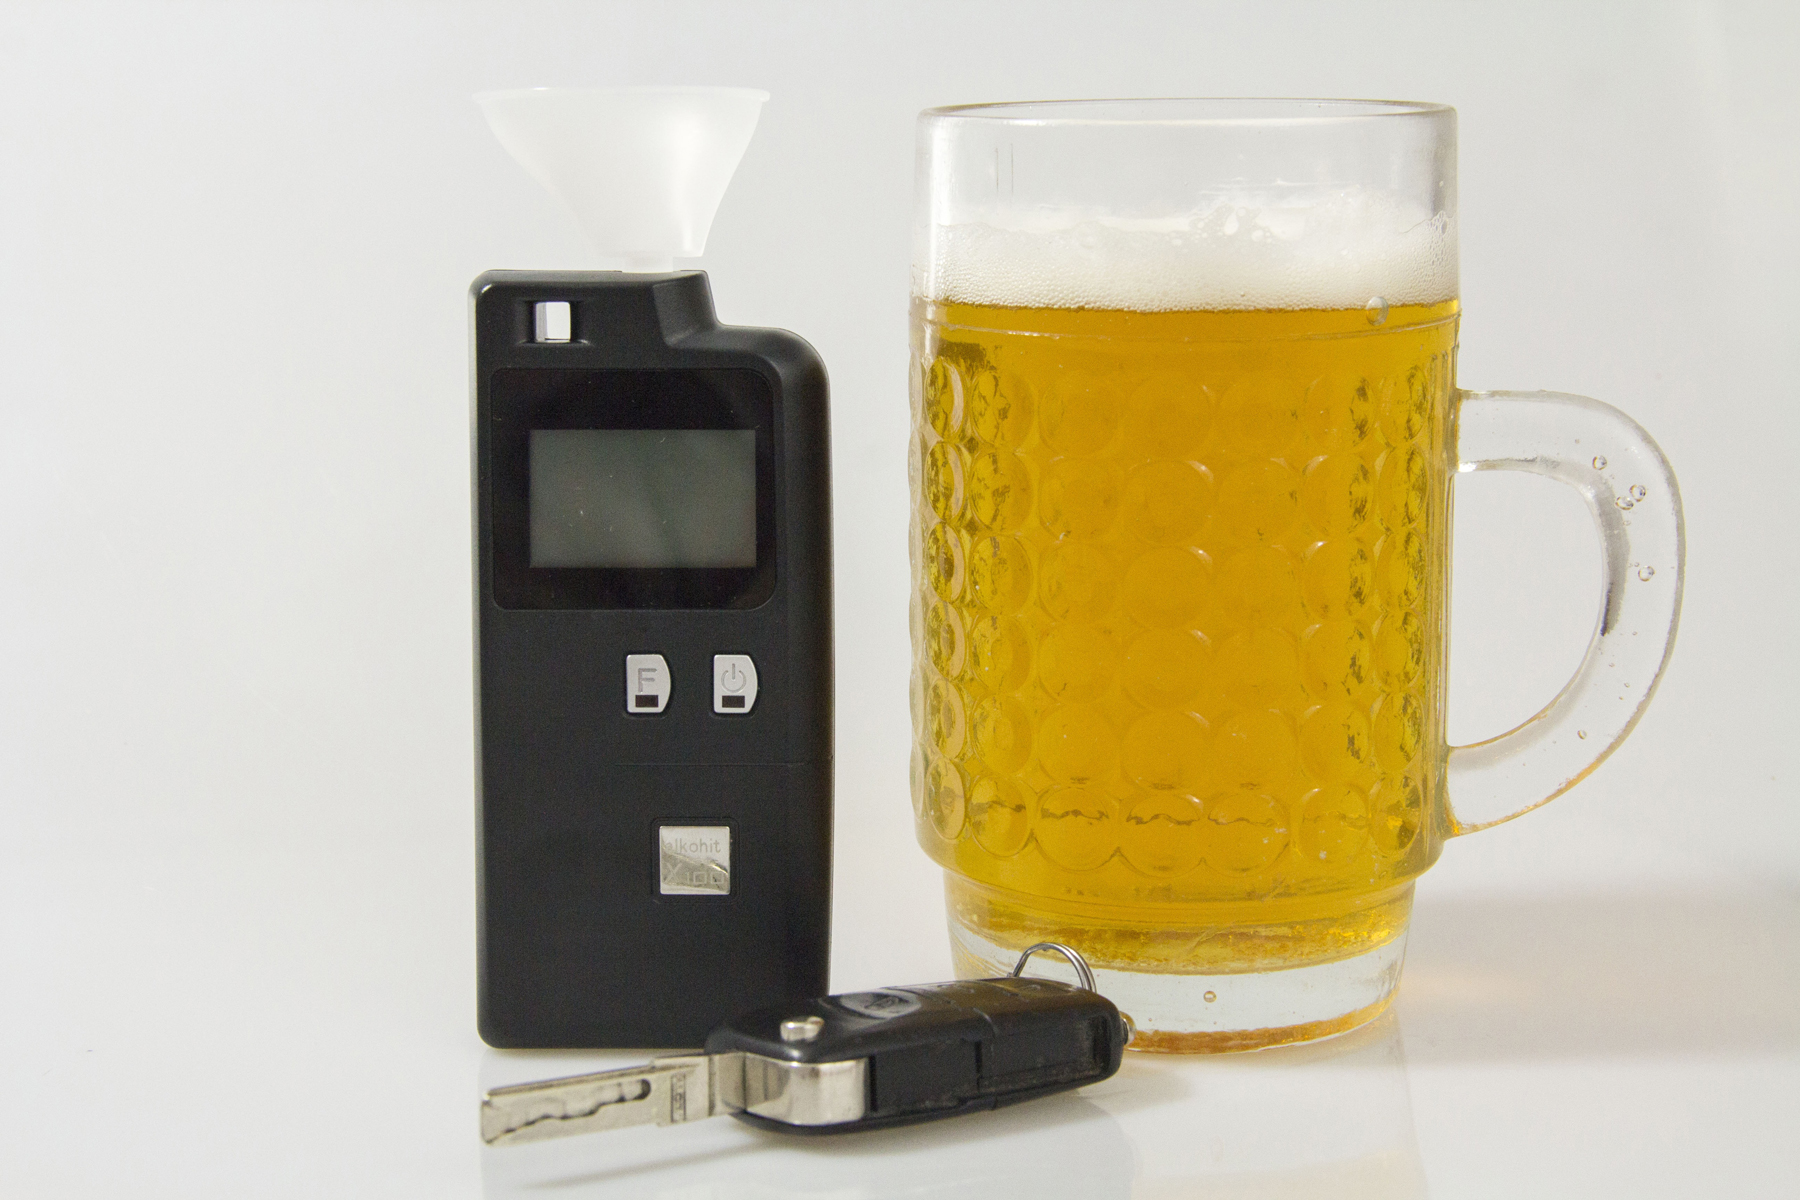 An electronic breathalyser next to a glass of beer